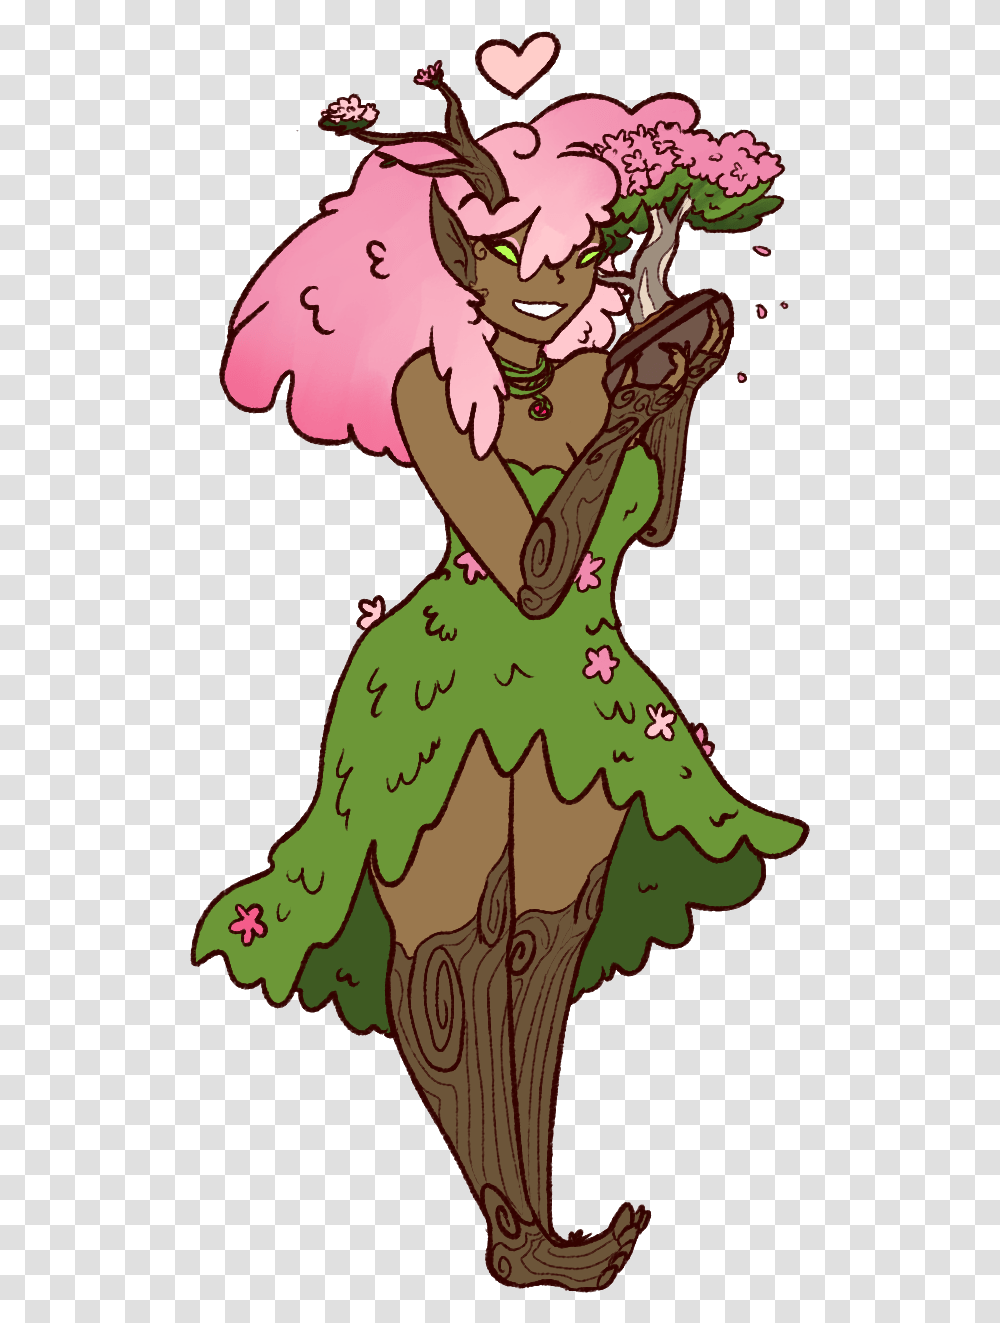 Cherry A Dryad Bonded To A Lil Bonsai Tree So She Can Dryad Cute, Dance Pose, Leisure Activities, Performer, Dress Transparent Png